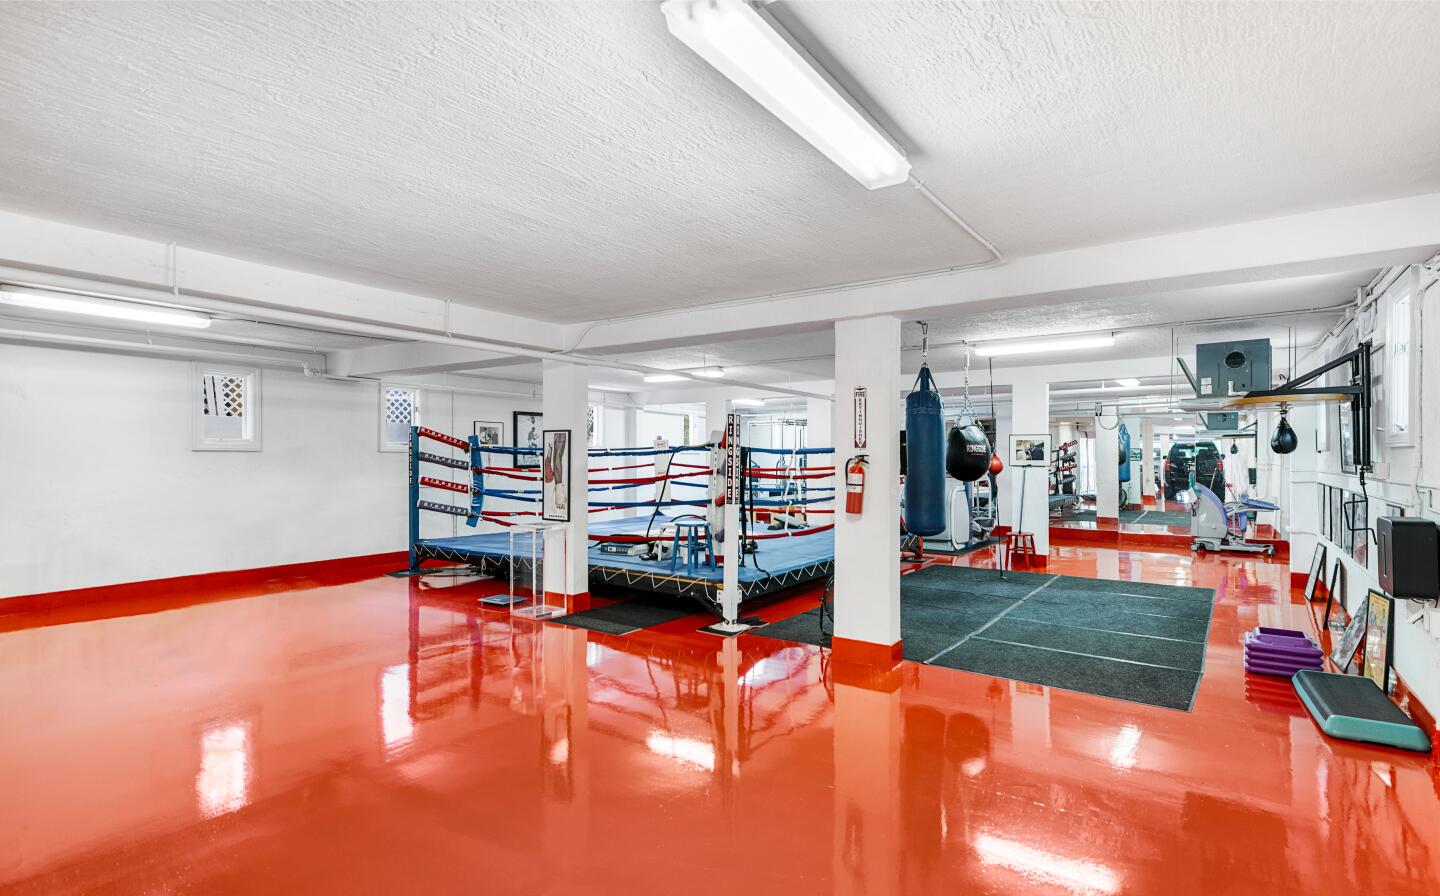 The boxing ring is near exercise equipment.